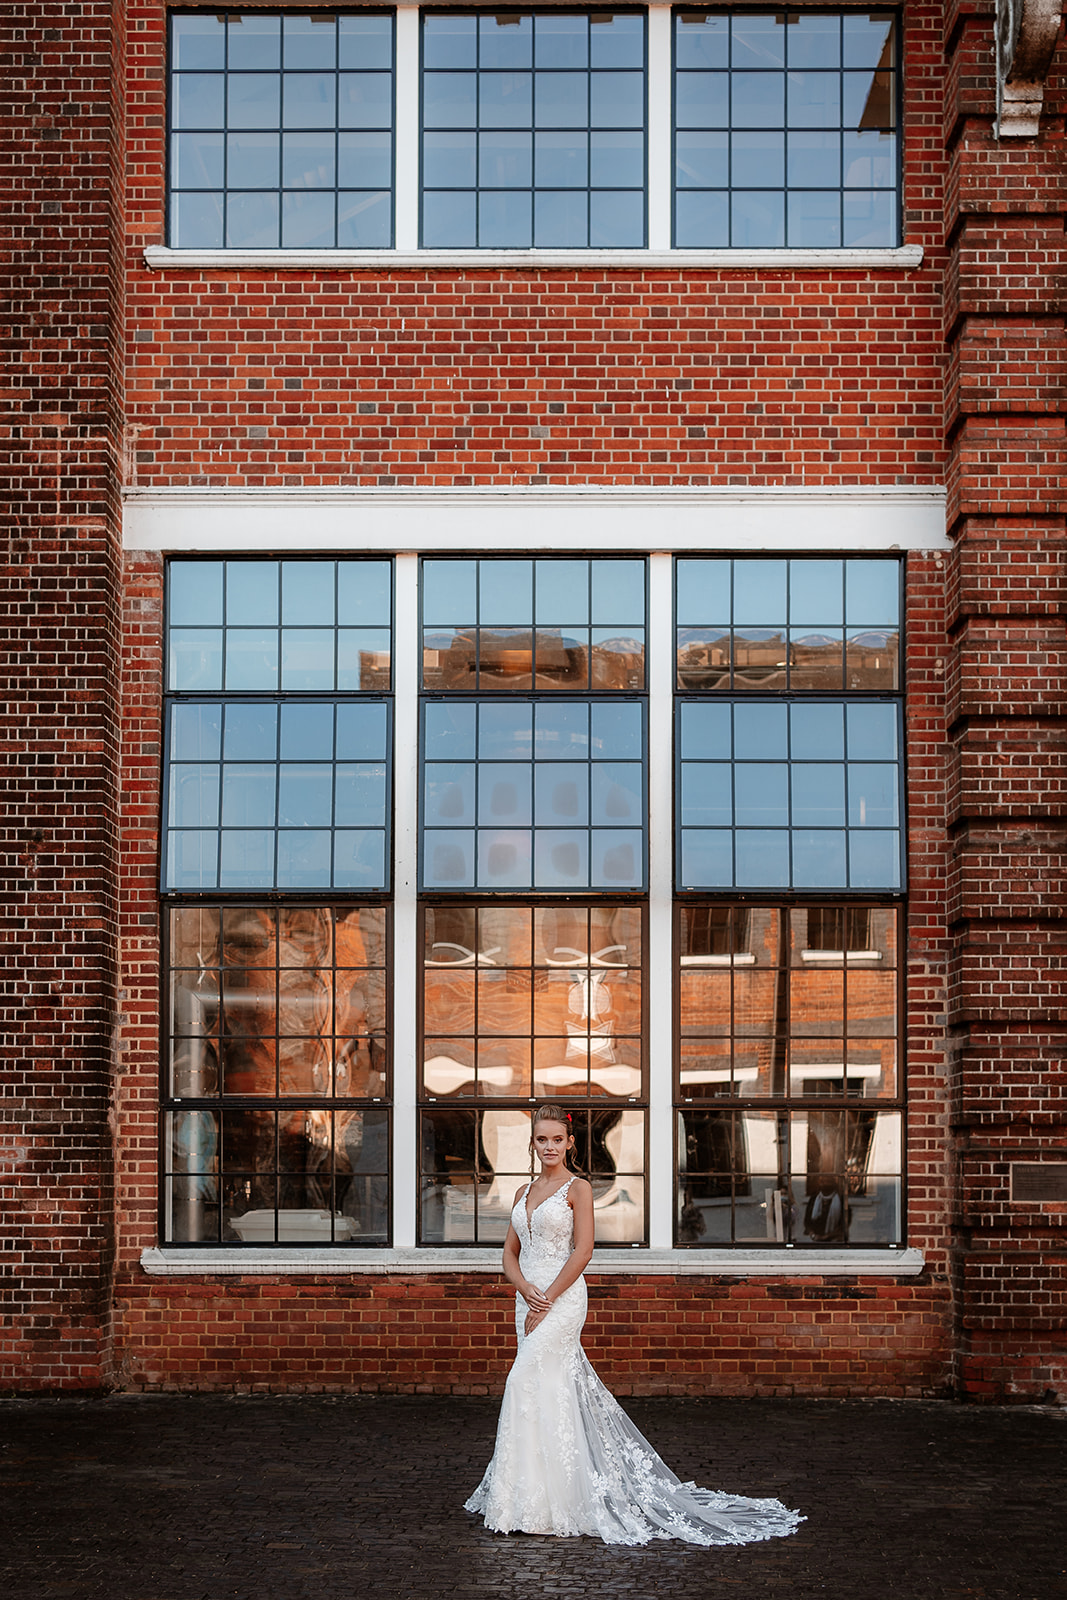 Bridal model in a white lace dress stands in front of tall industrial windows at the Bombay Sapphire Distillery. 